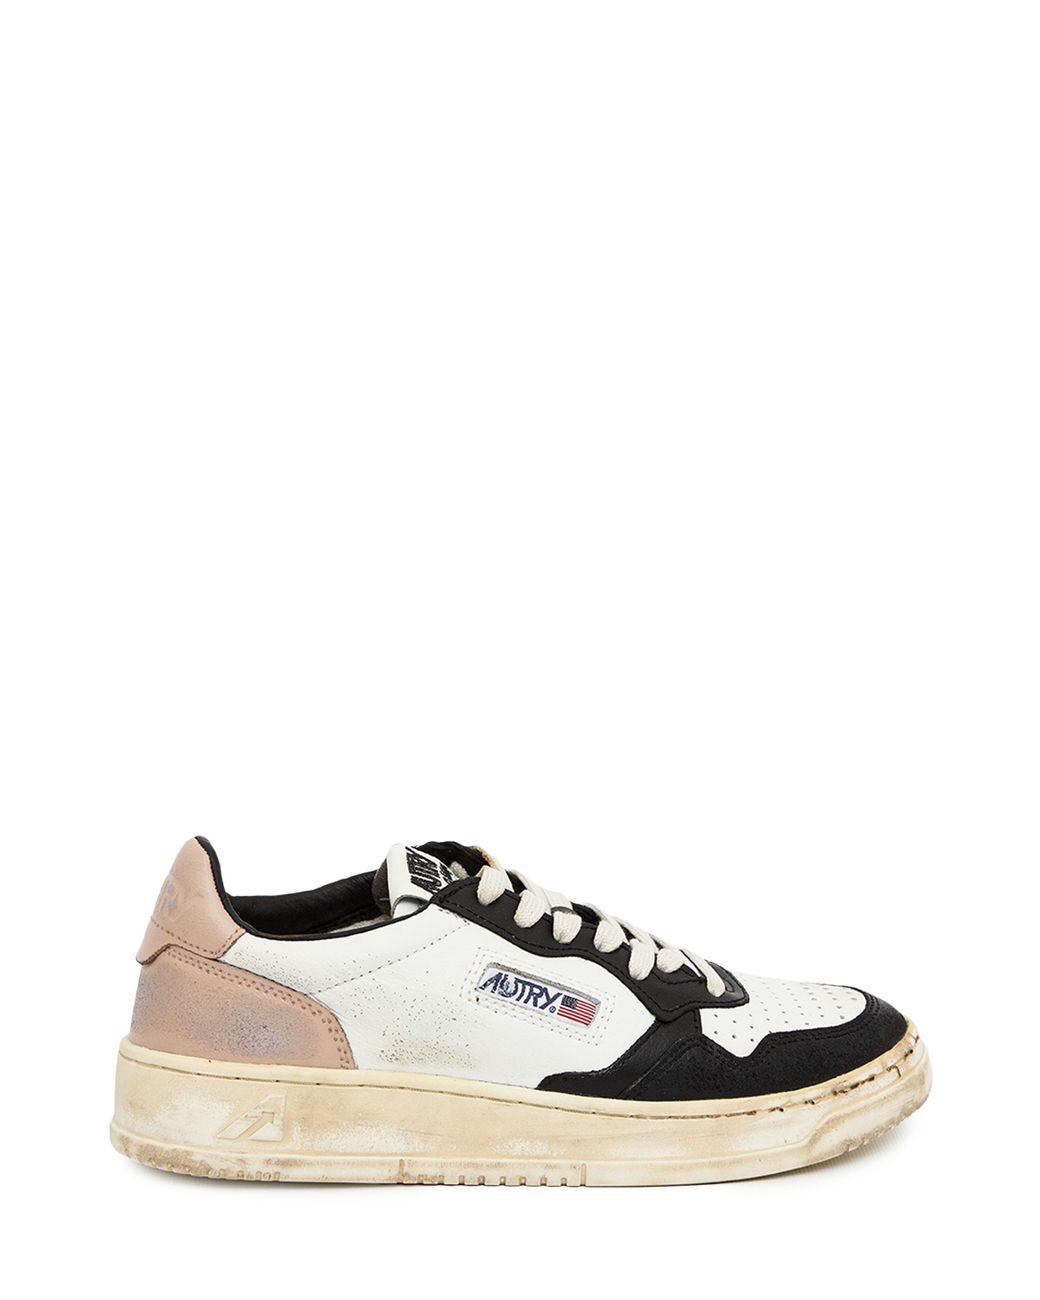 Autry Medalist Low Super Vintage Sneakers in White | Lyst